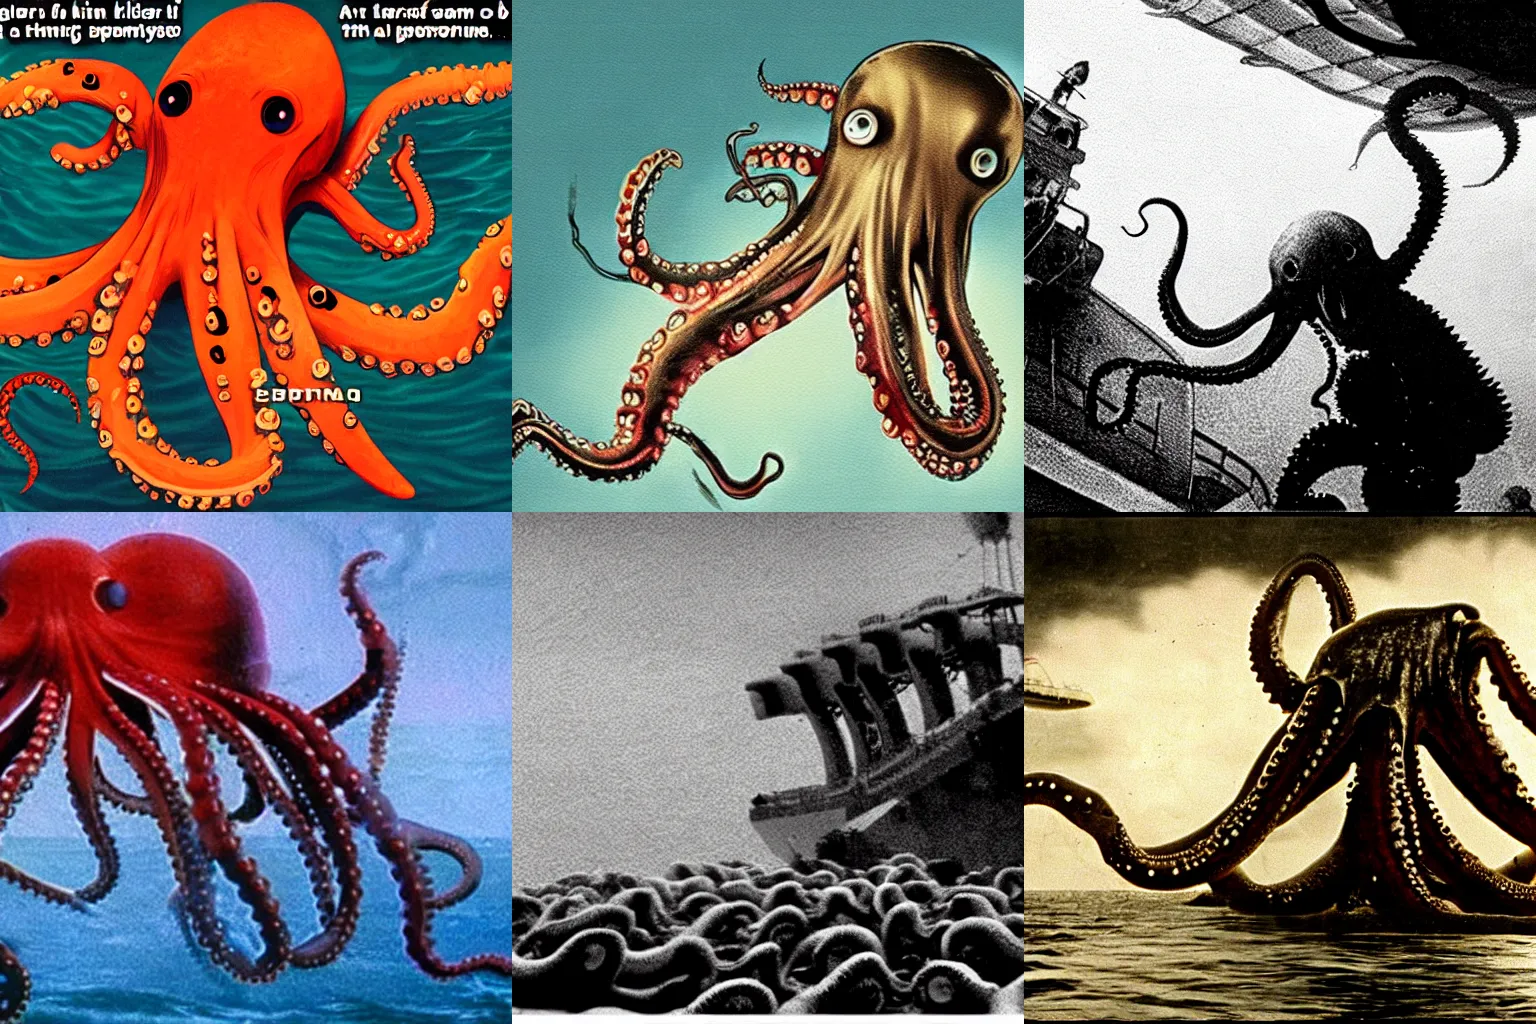 Prompt: screenshot from a horror movie about a killer octopus attacking an ocean liner